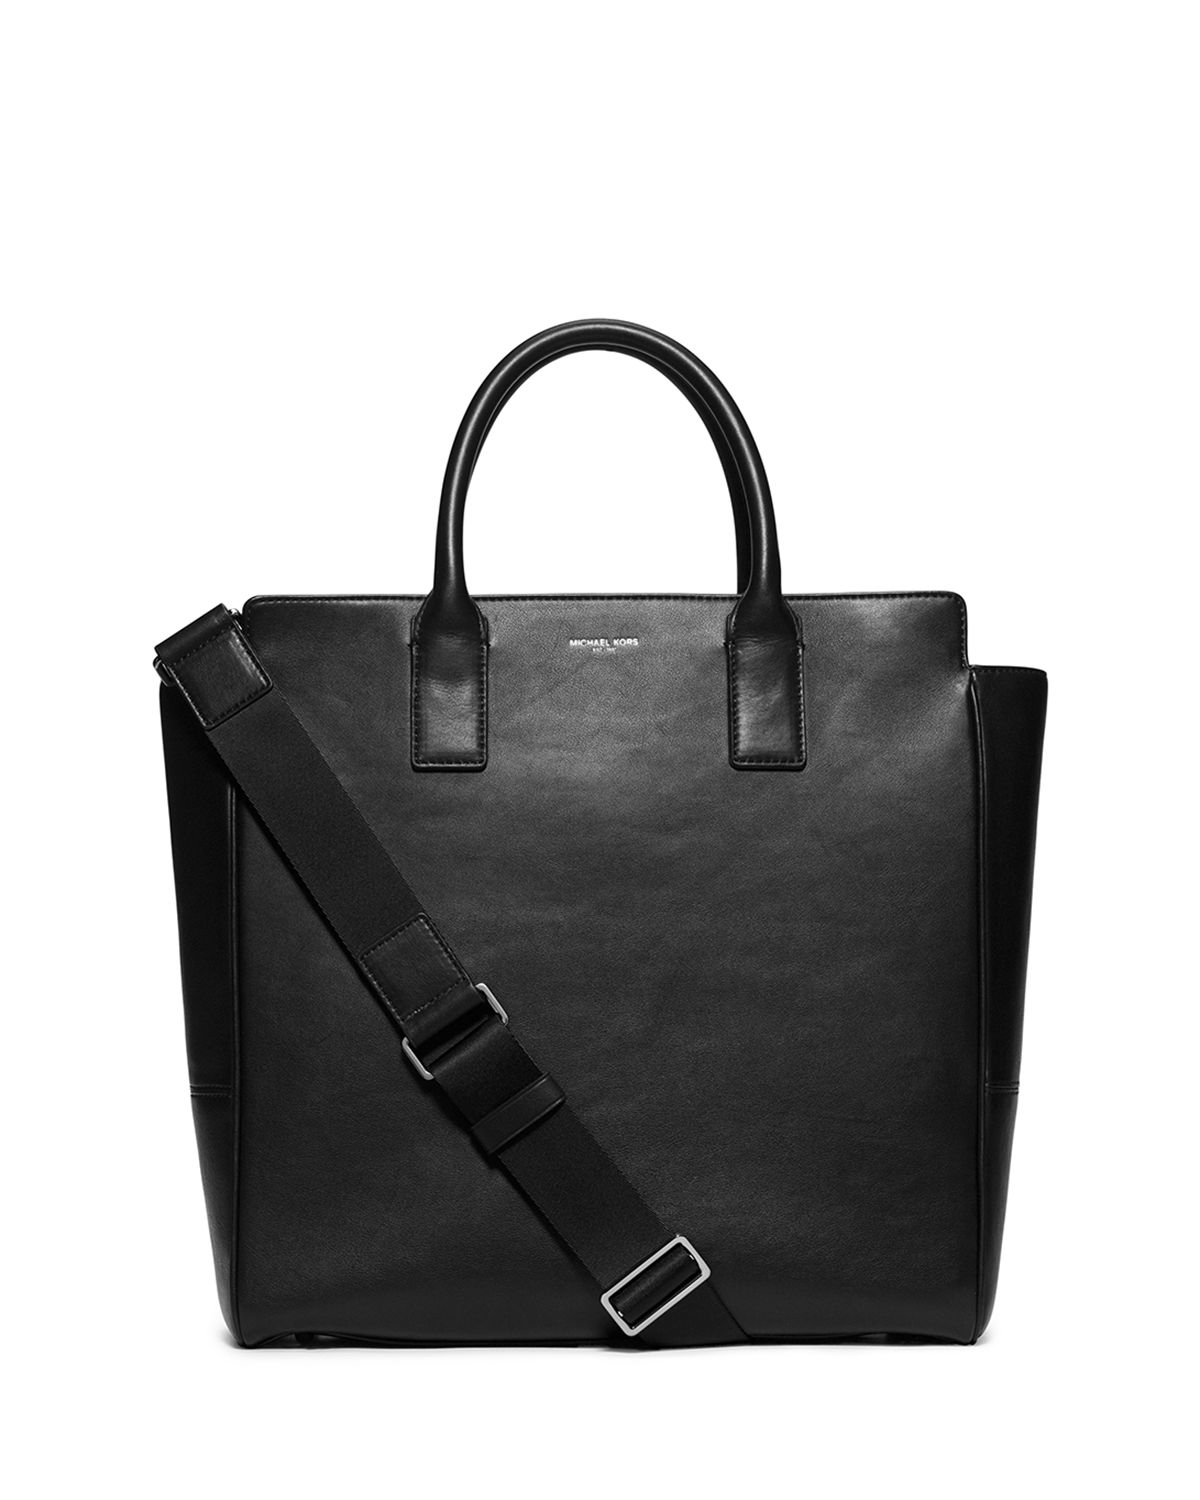 Lyst - Michael Kors Dylan Soft Leather Tote Bag in Black